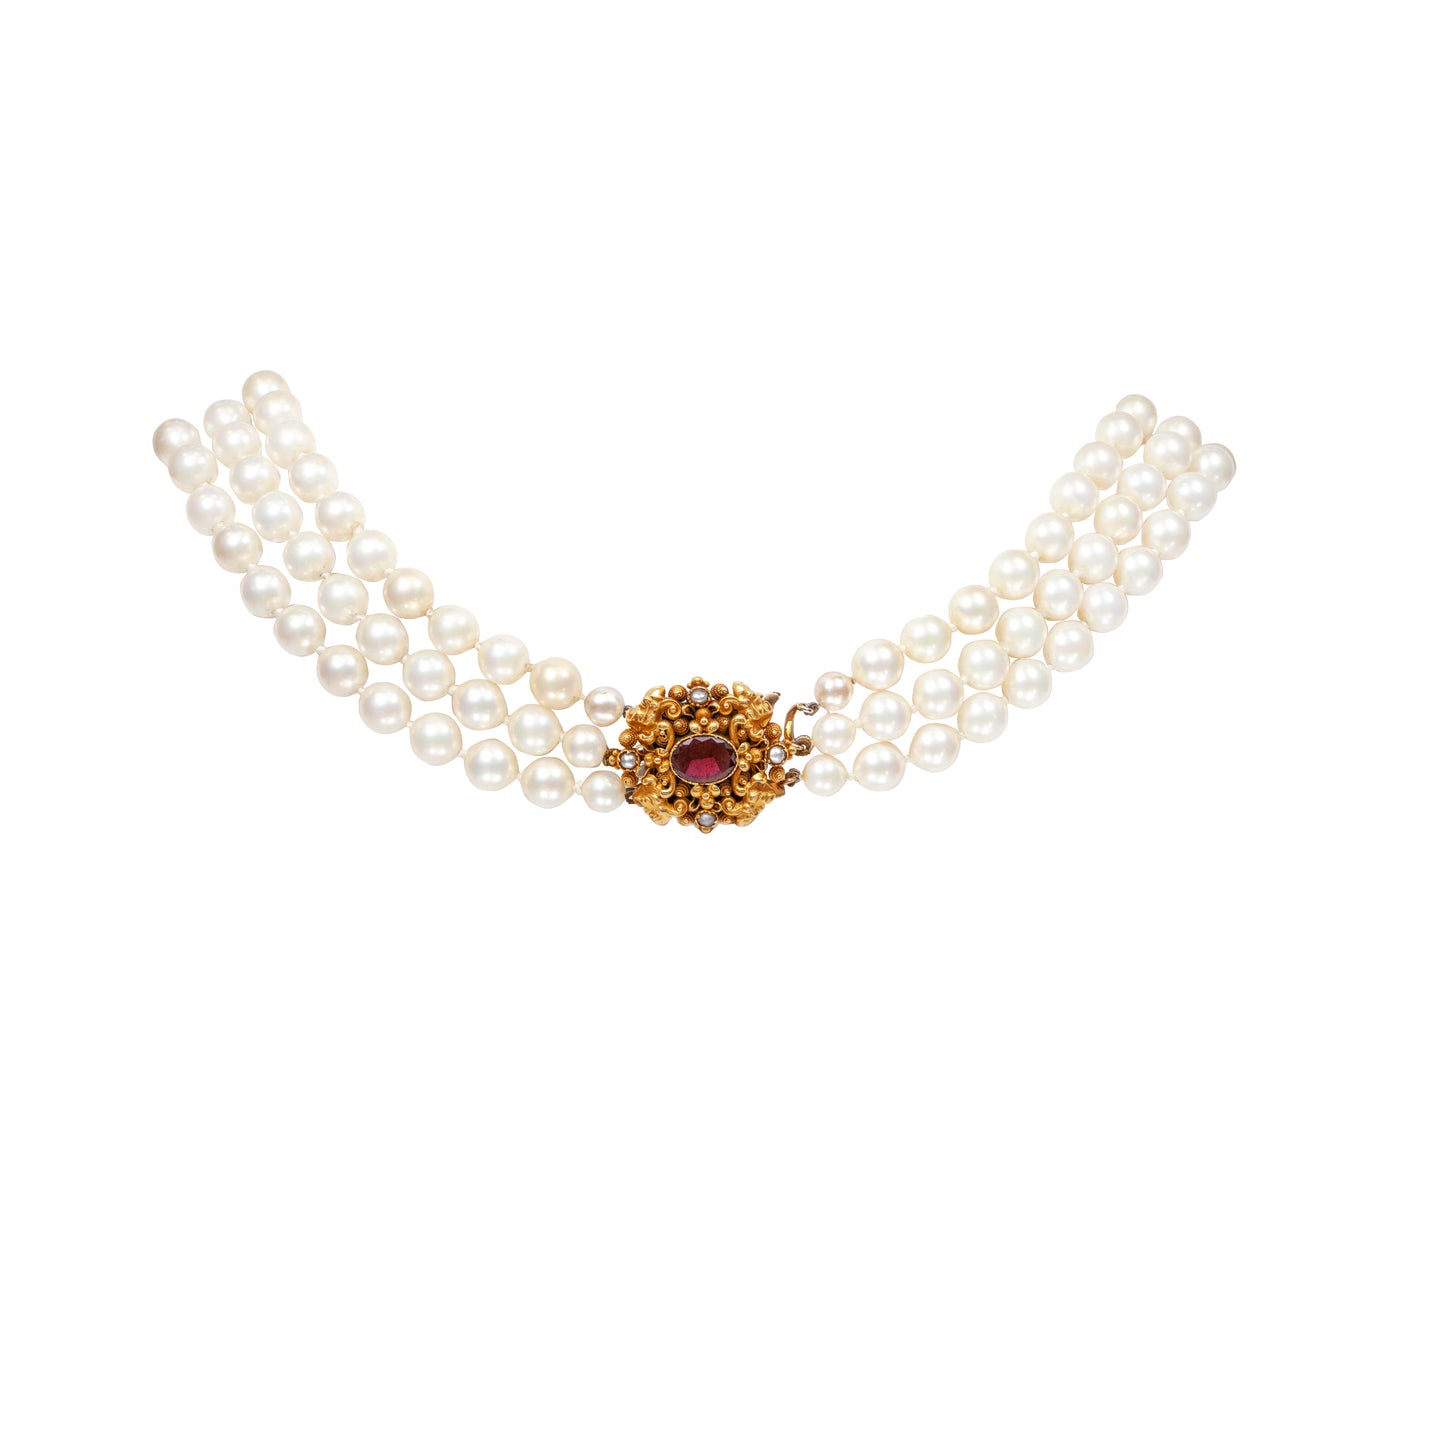 Three-Row Cultured Pearl Necklace with Garnet and Seed Pearl Yellow Gold Clasp